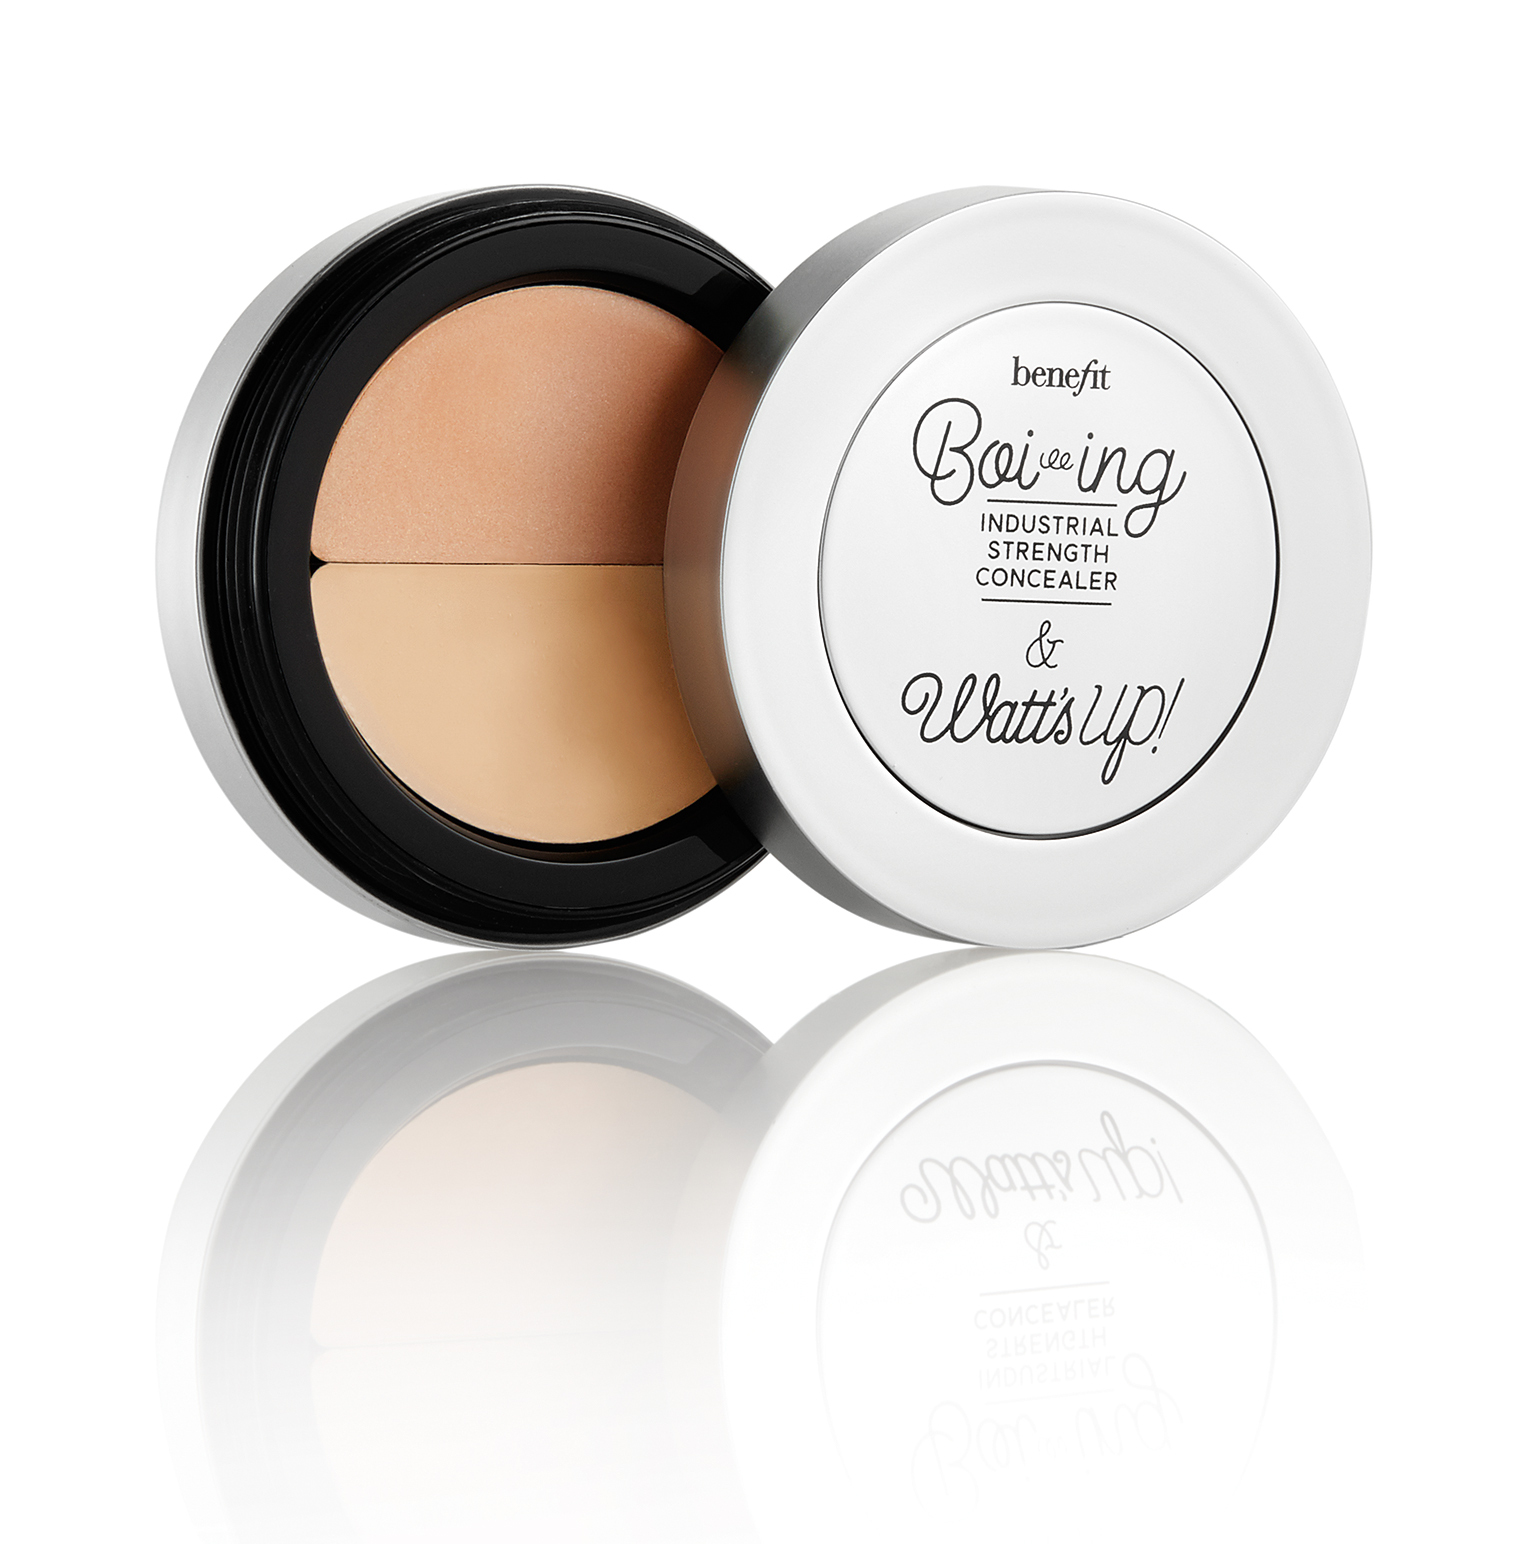 Benefit Cosmetics, one of the best multitasking beauty products